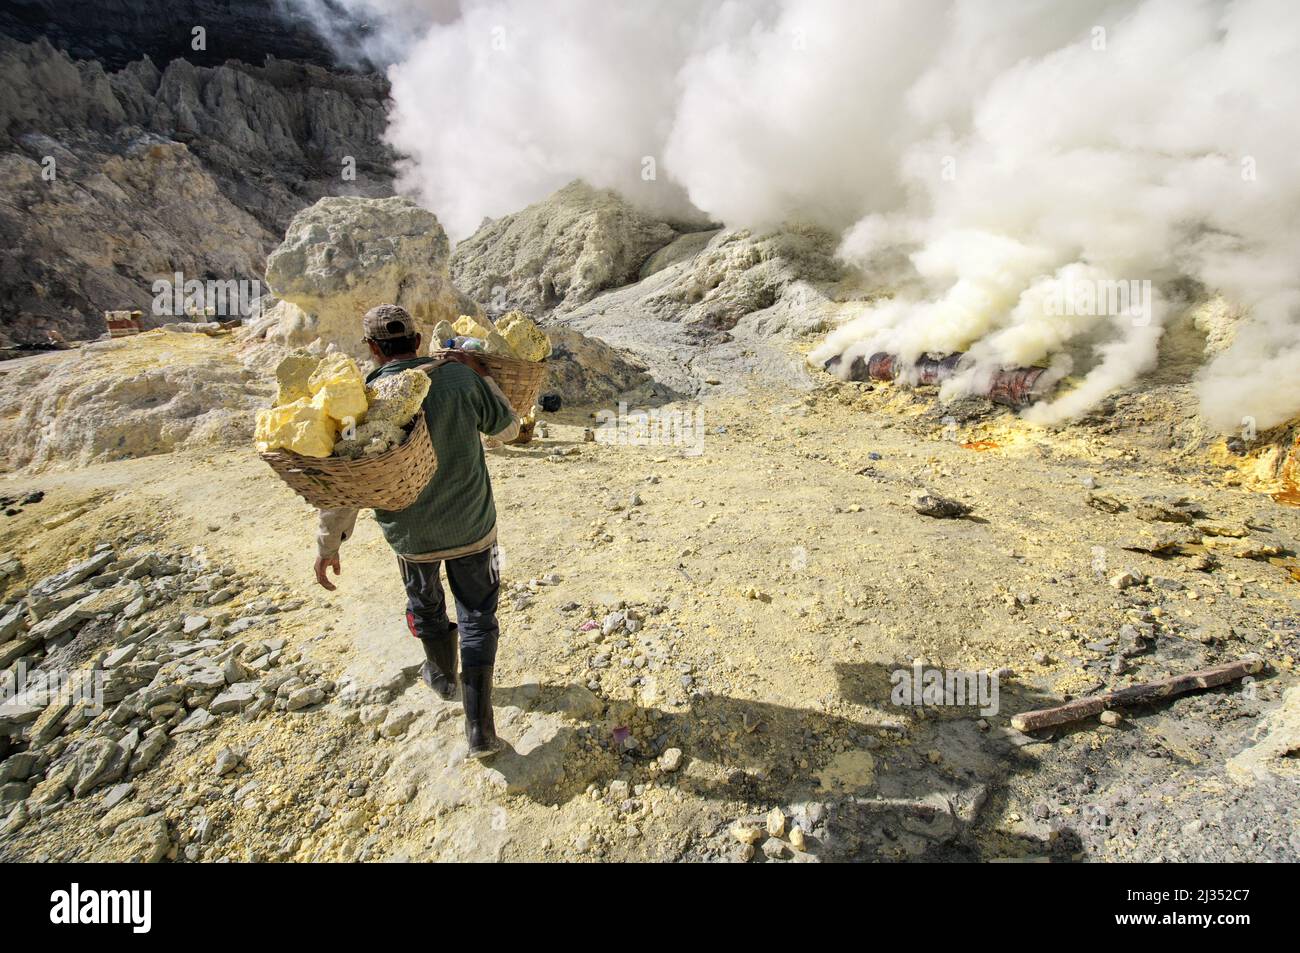 Miner carrying baskets with sulfur inside the crater of Ijen volcano, Java Island, Indonesia Stock Photo